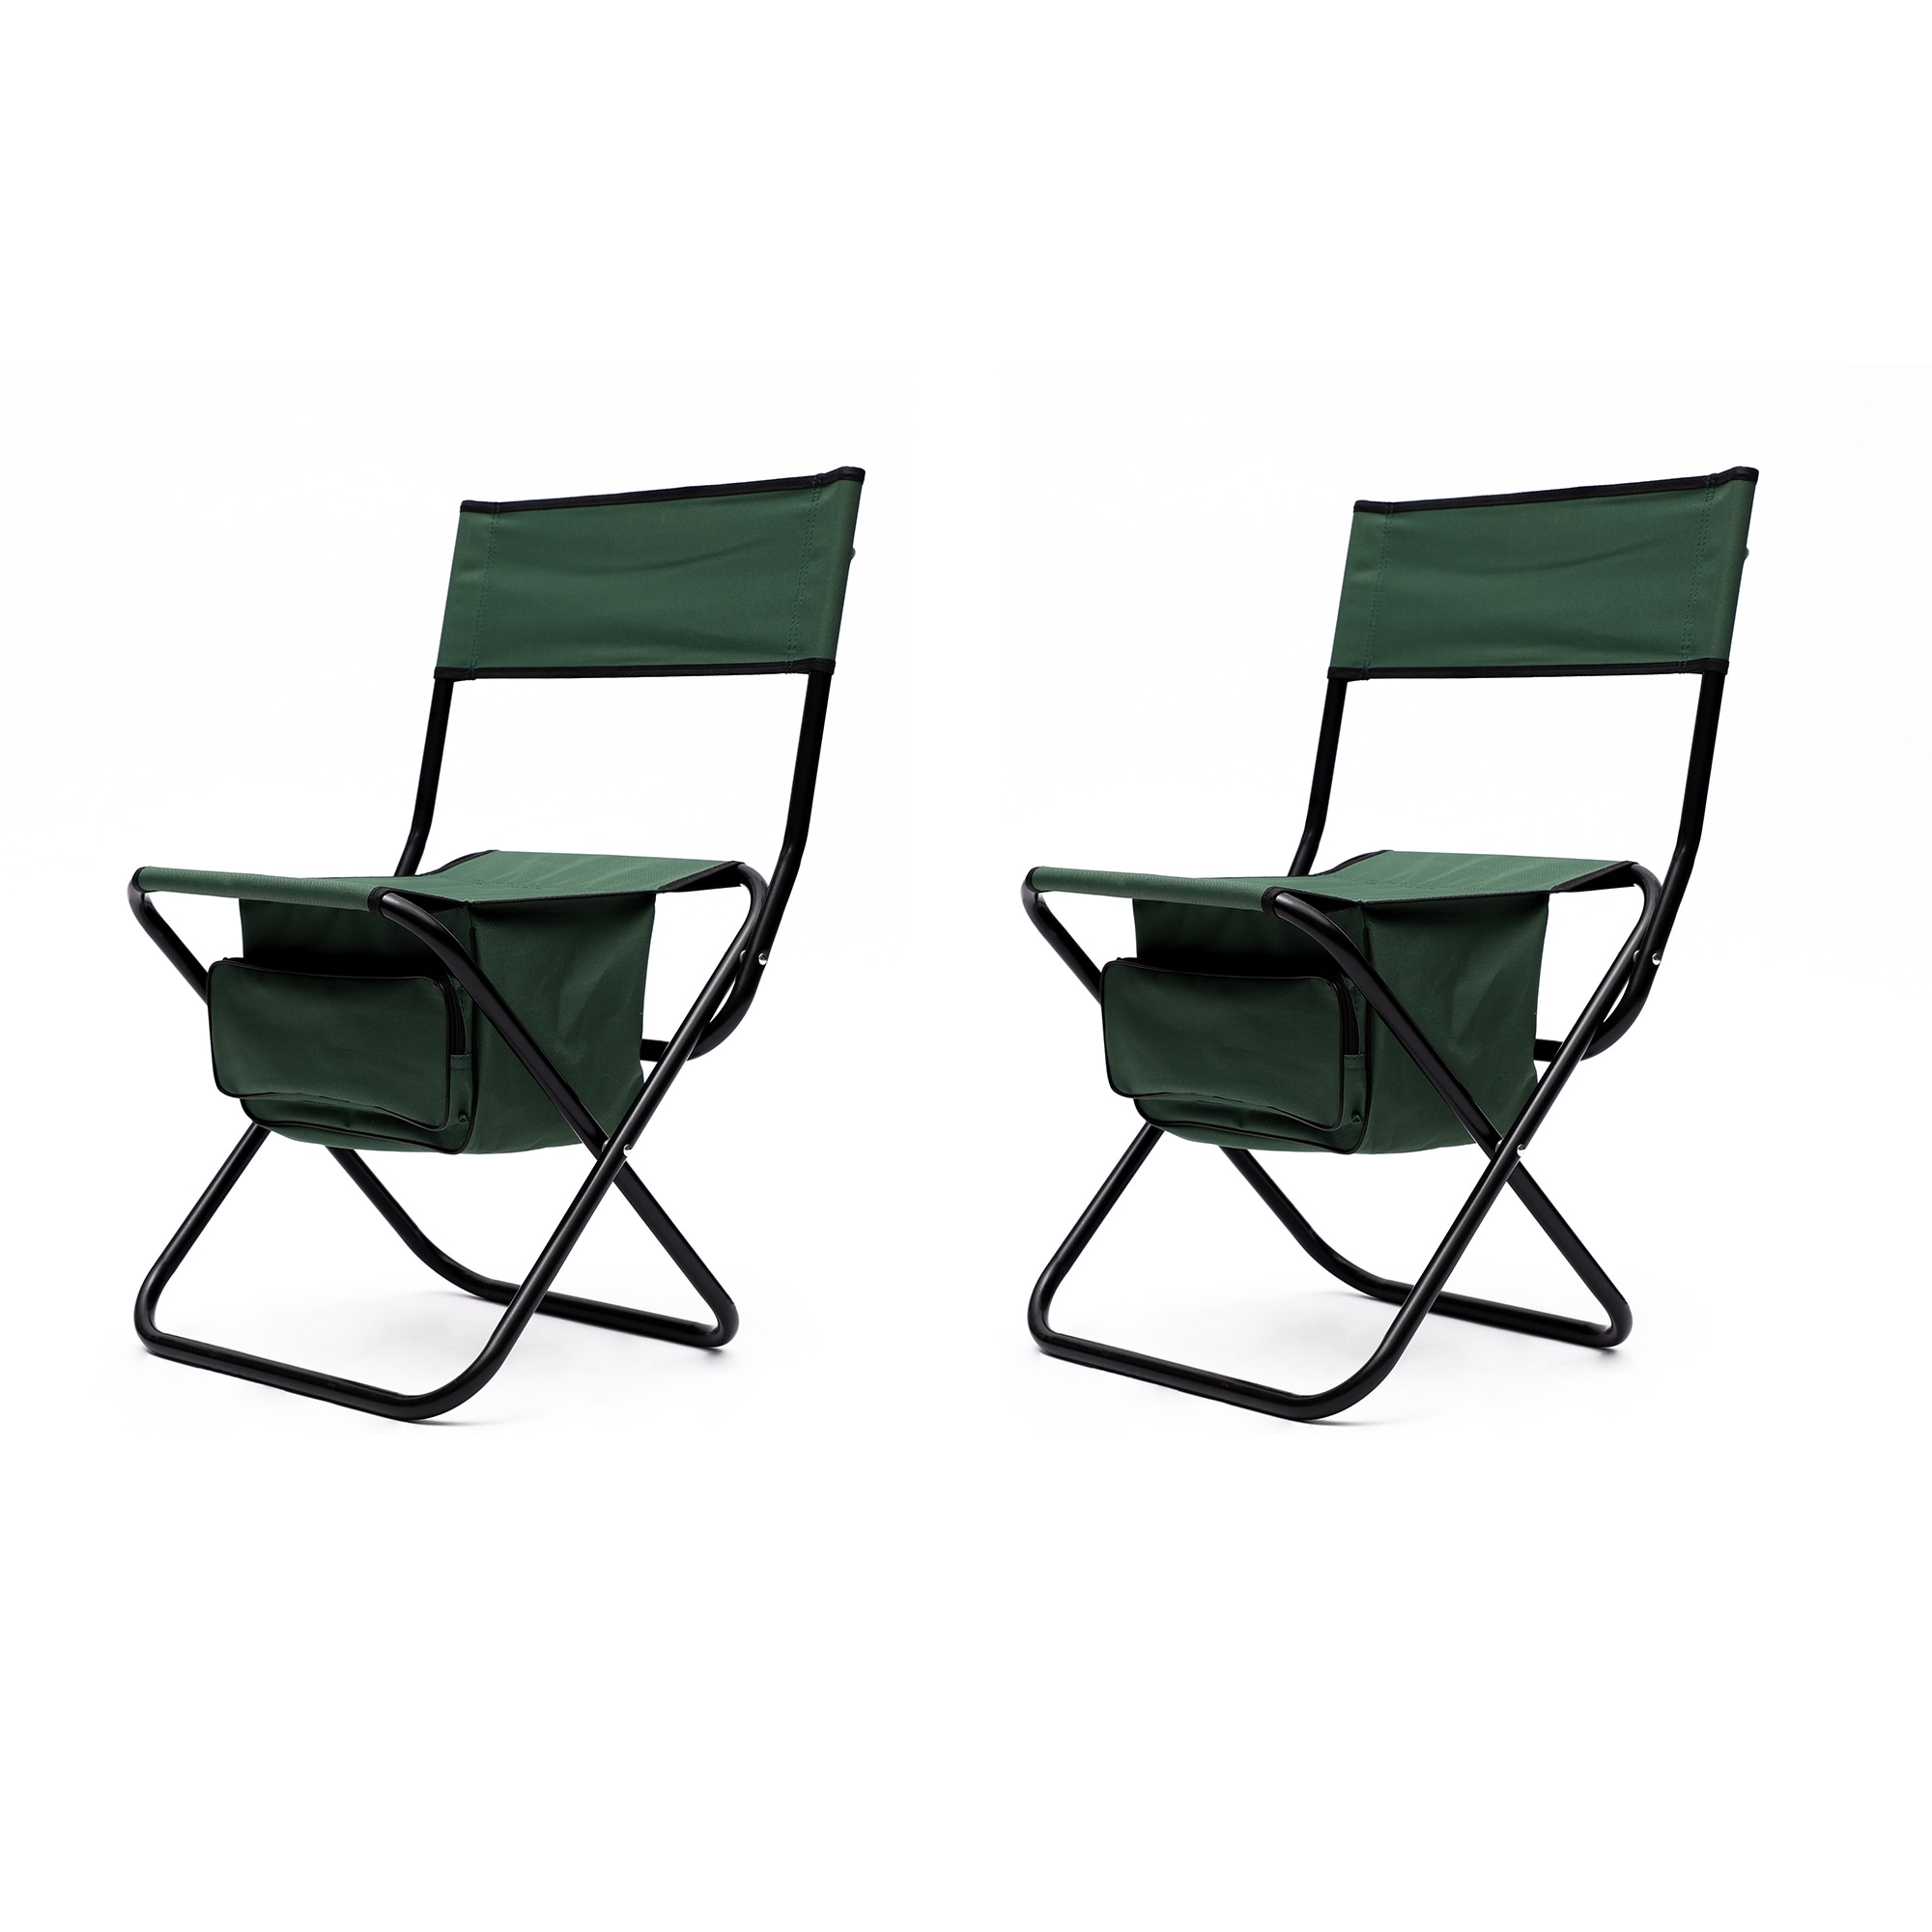 2-piece Set Folding Outdoor Camping Chair With Storage Bag  Portable Chair For Camping  Picnics and Fishing  Maximum Load 280 Lbs